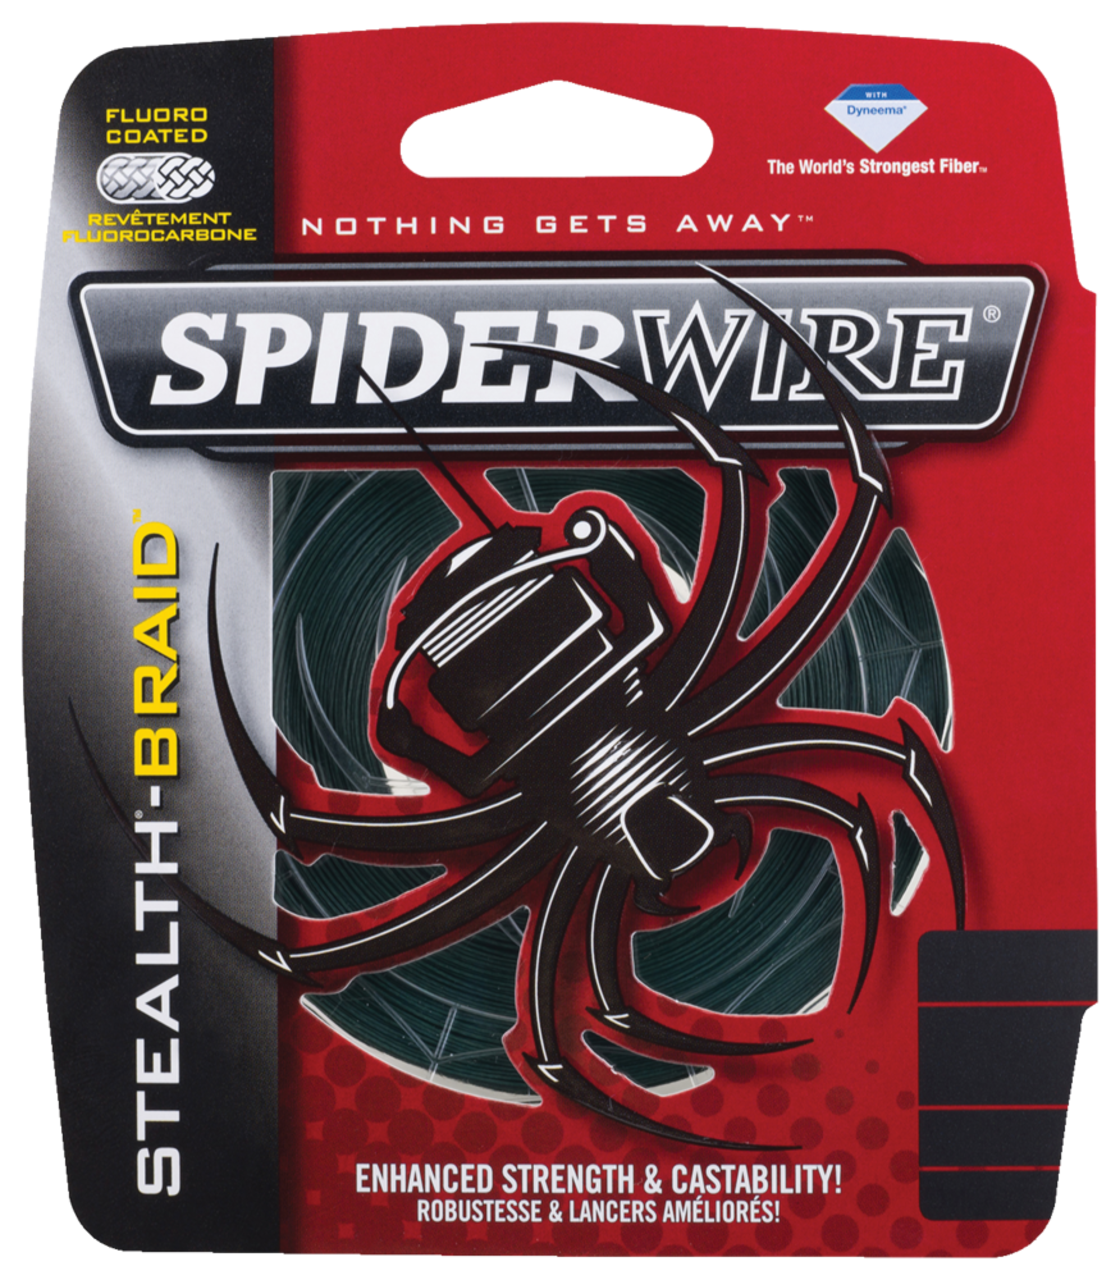 Spiderwire Fishing Line Stealth Smooth 8 (Translucent, 150 m) at low prices